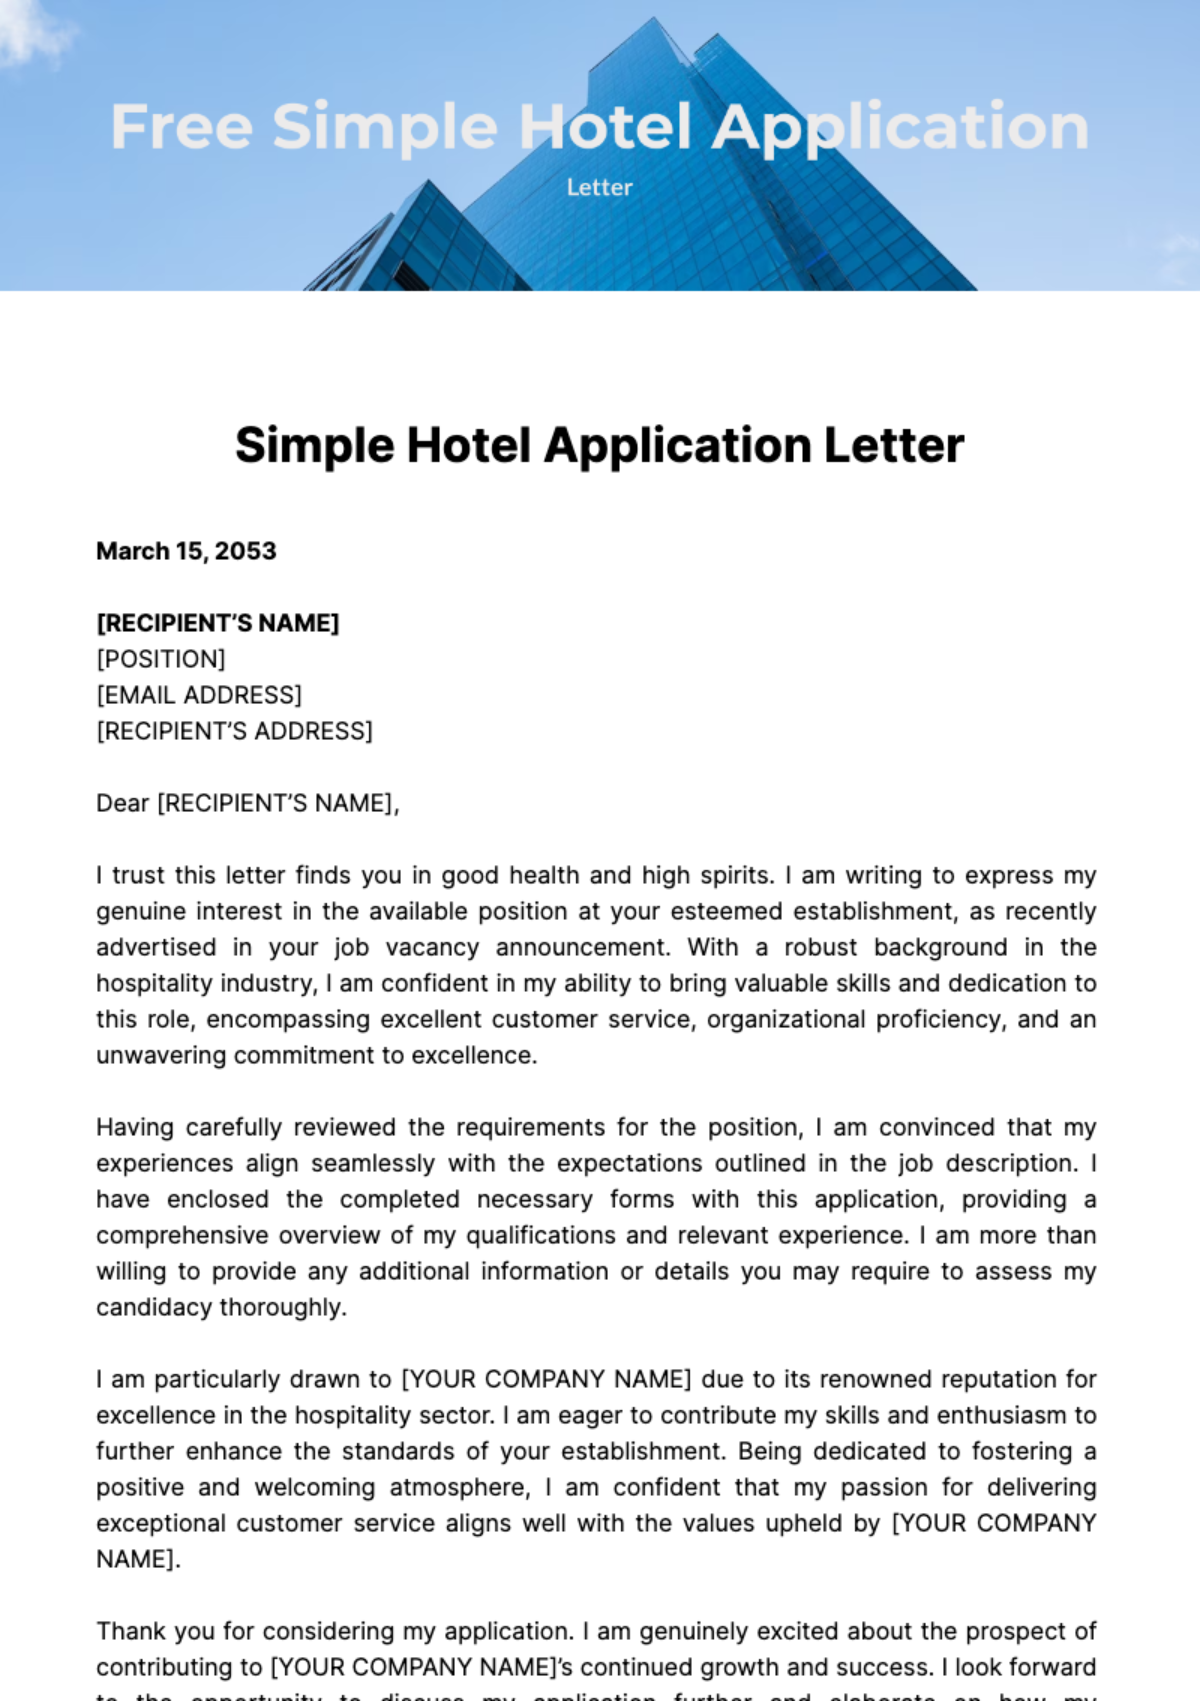 Free Simple Hotel Application Letter Template